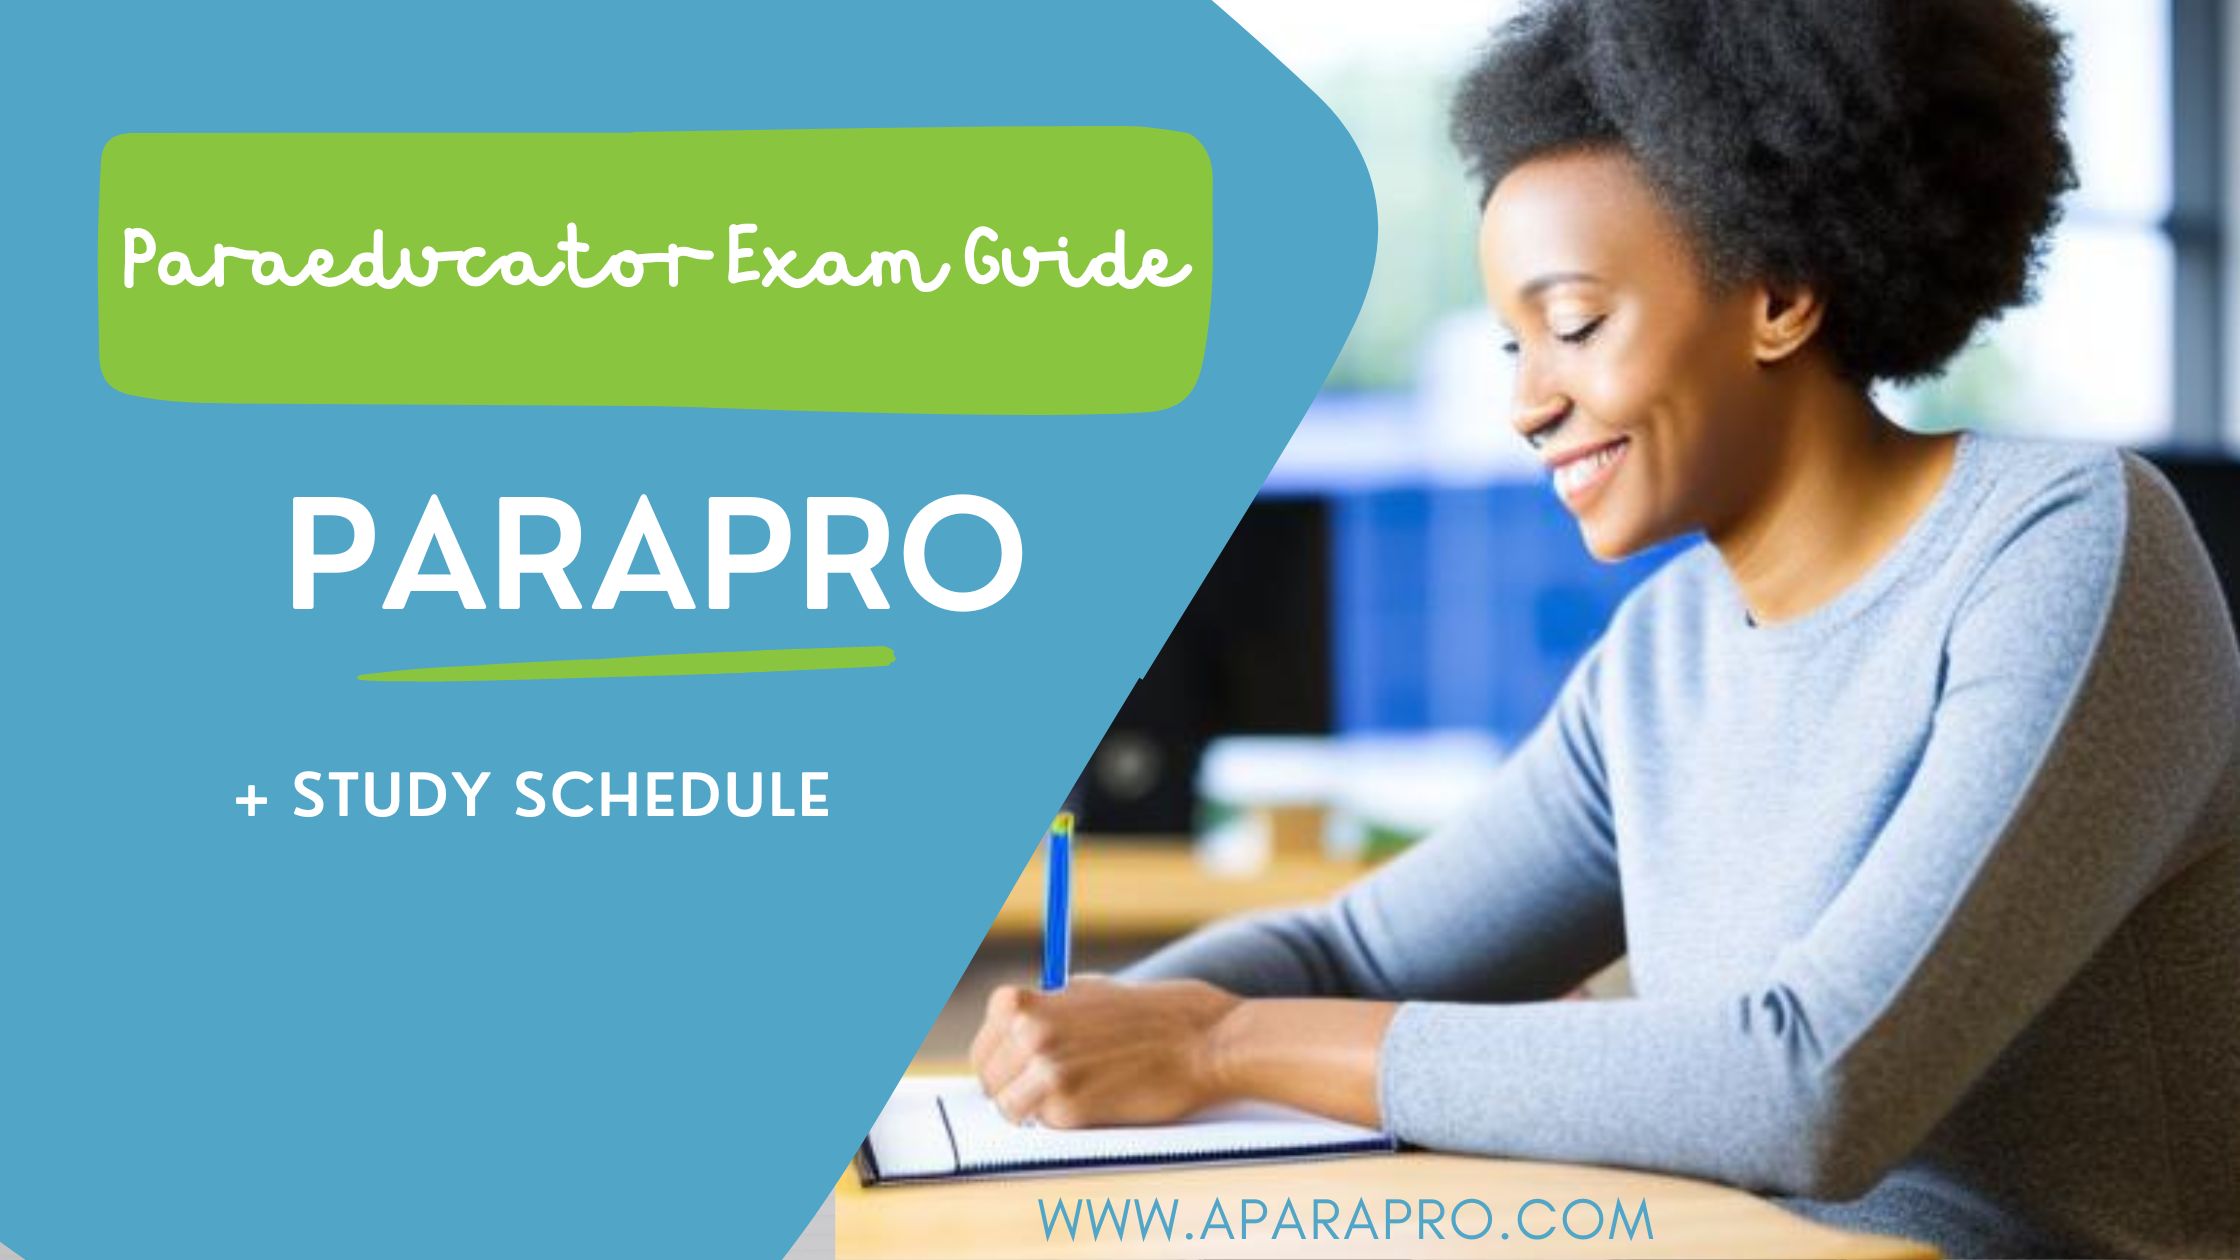 parapro exam guide featured image for a para pro - a hub for paraeducators